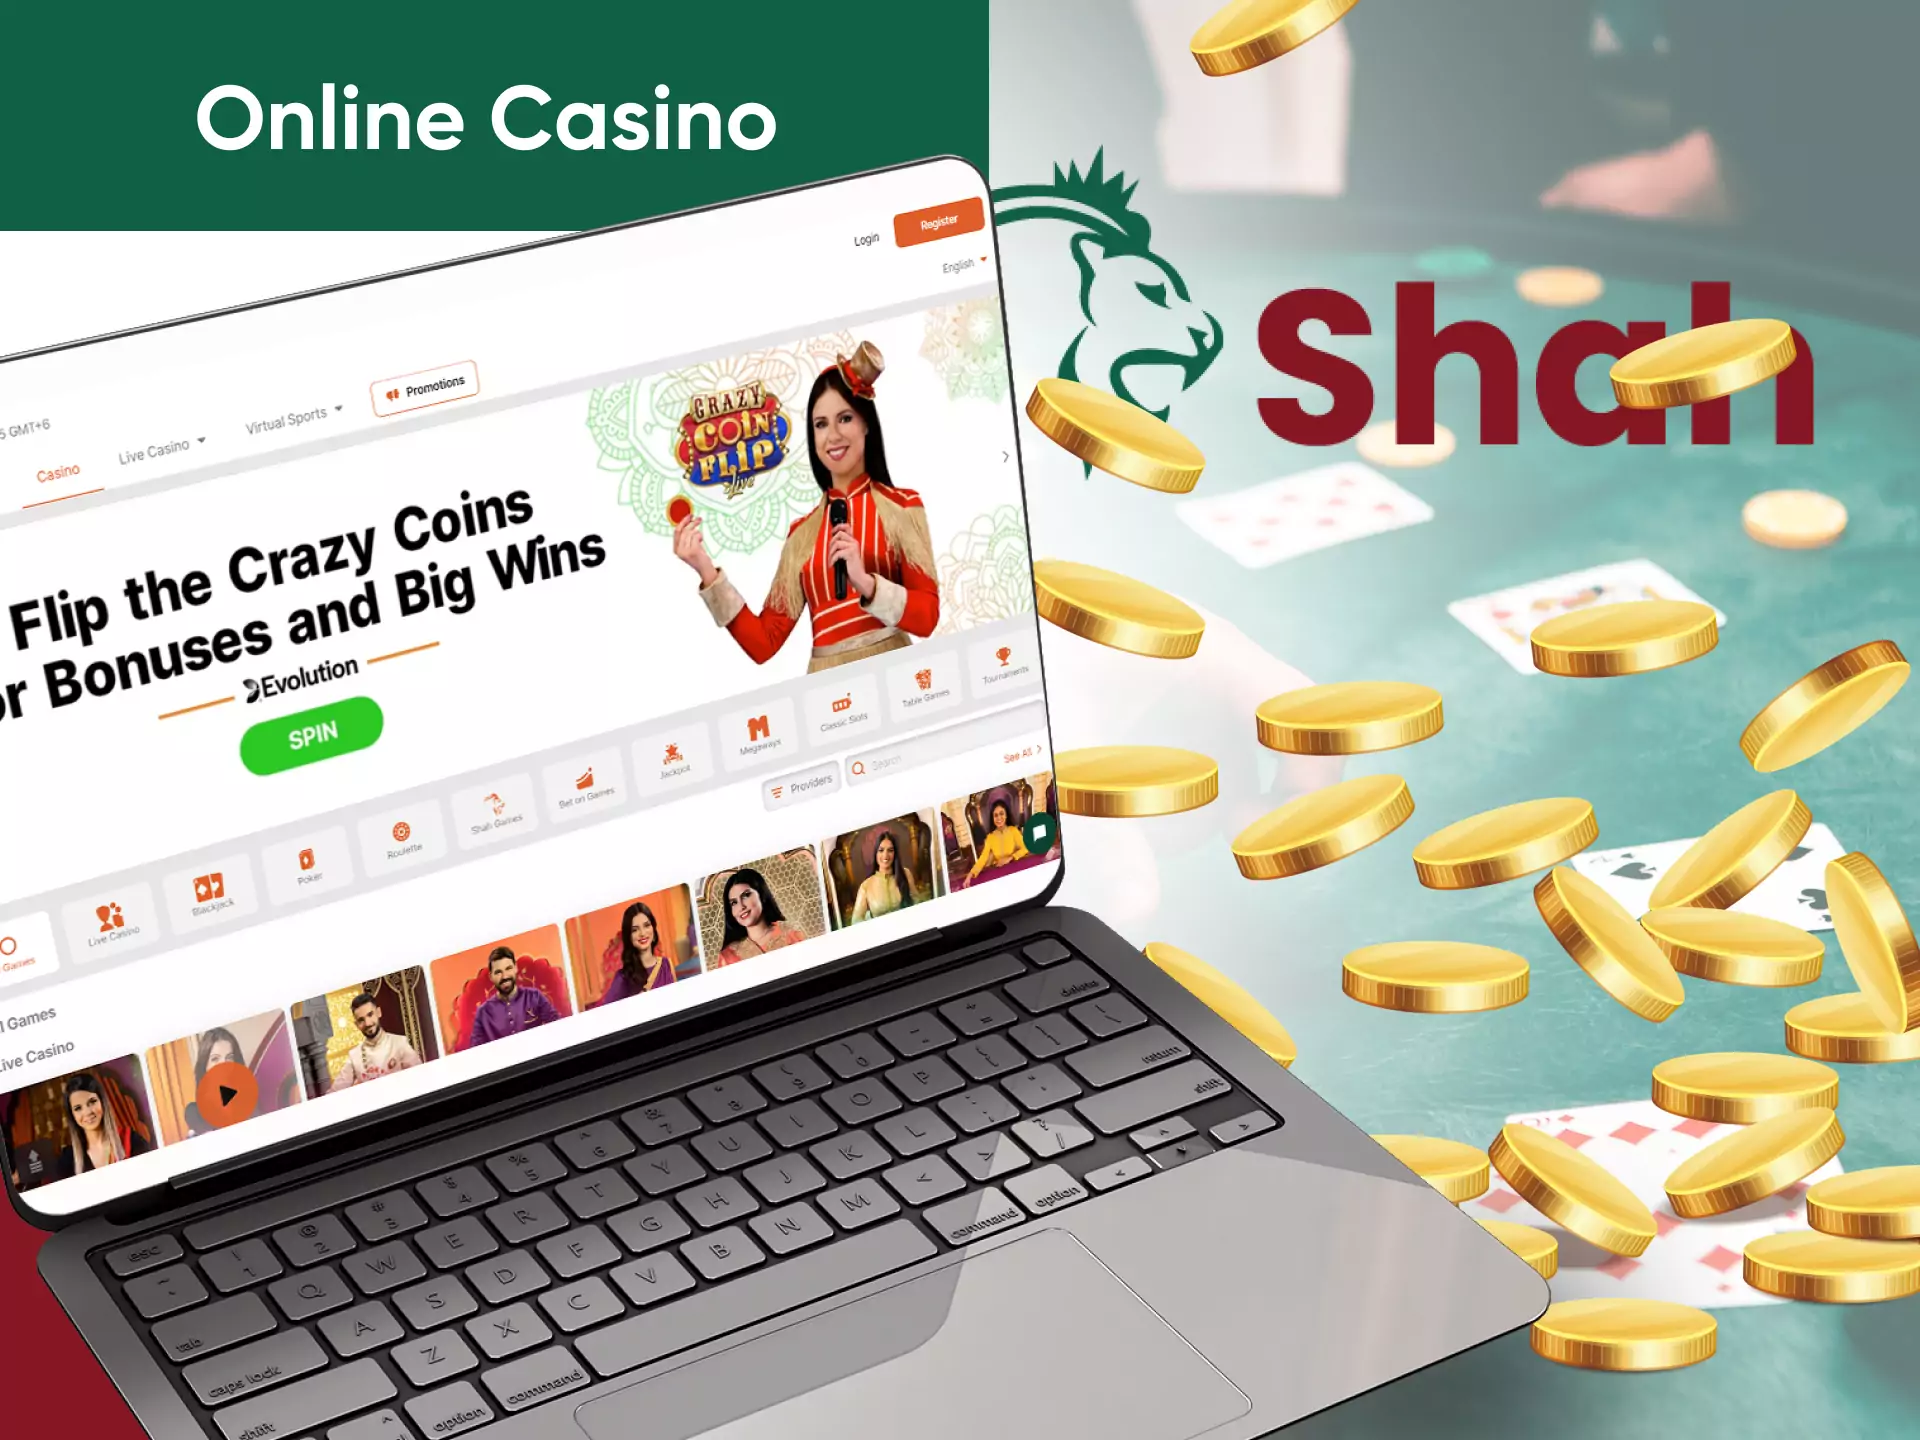 Besides betting, you can play casino games on Betshah.